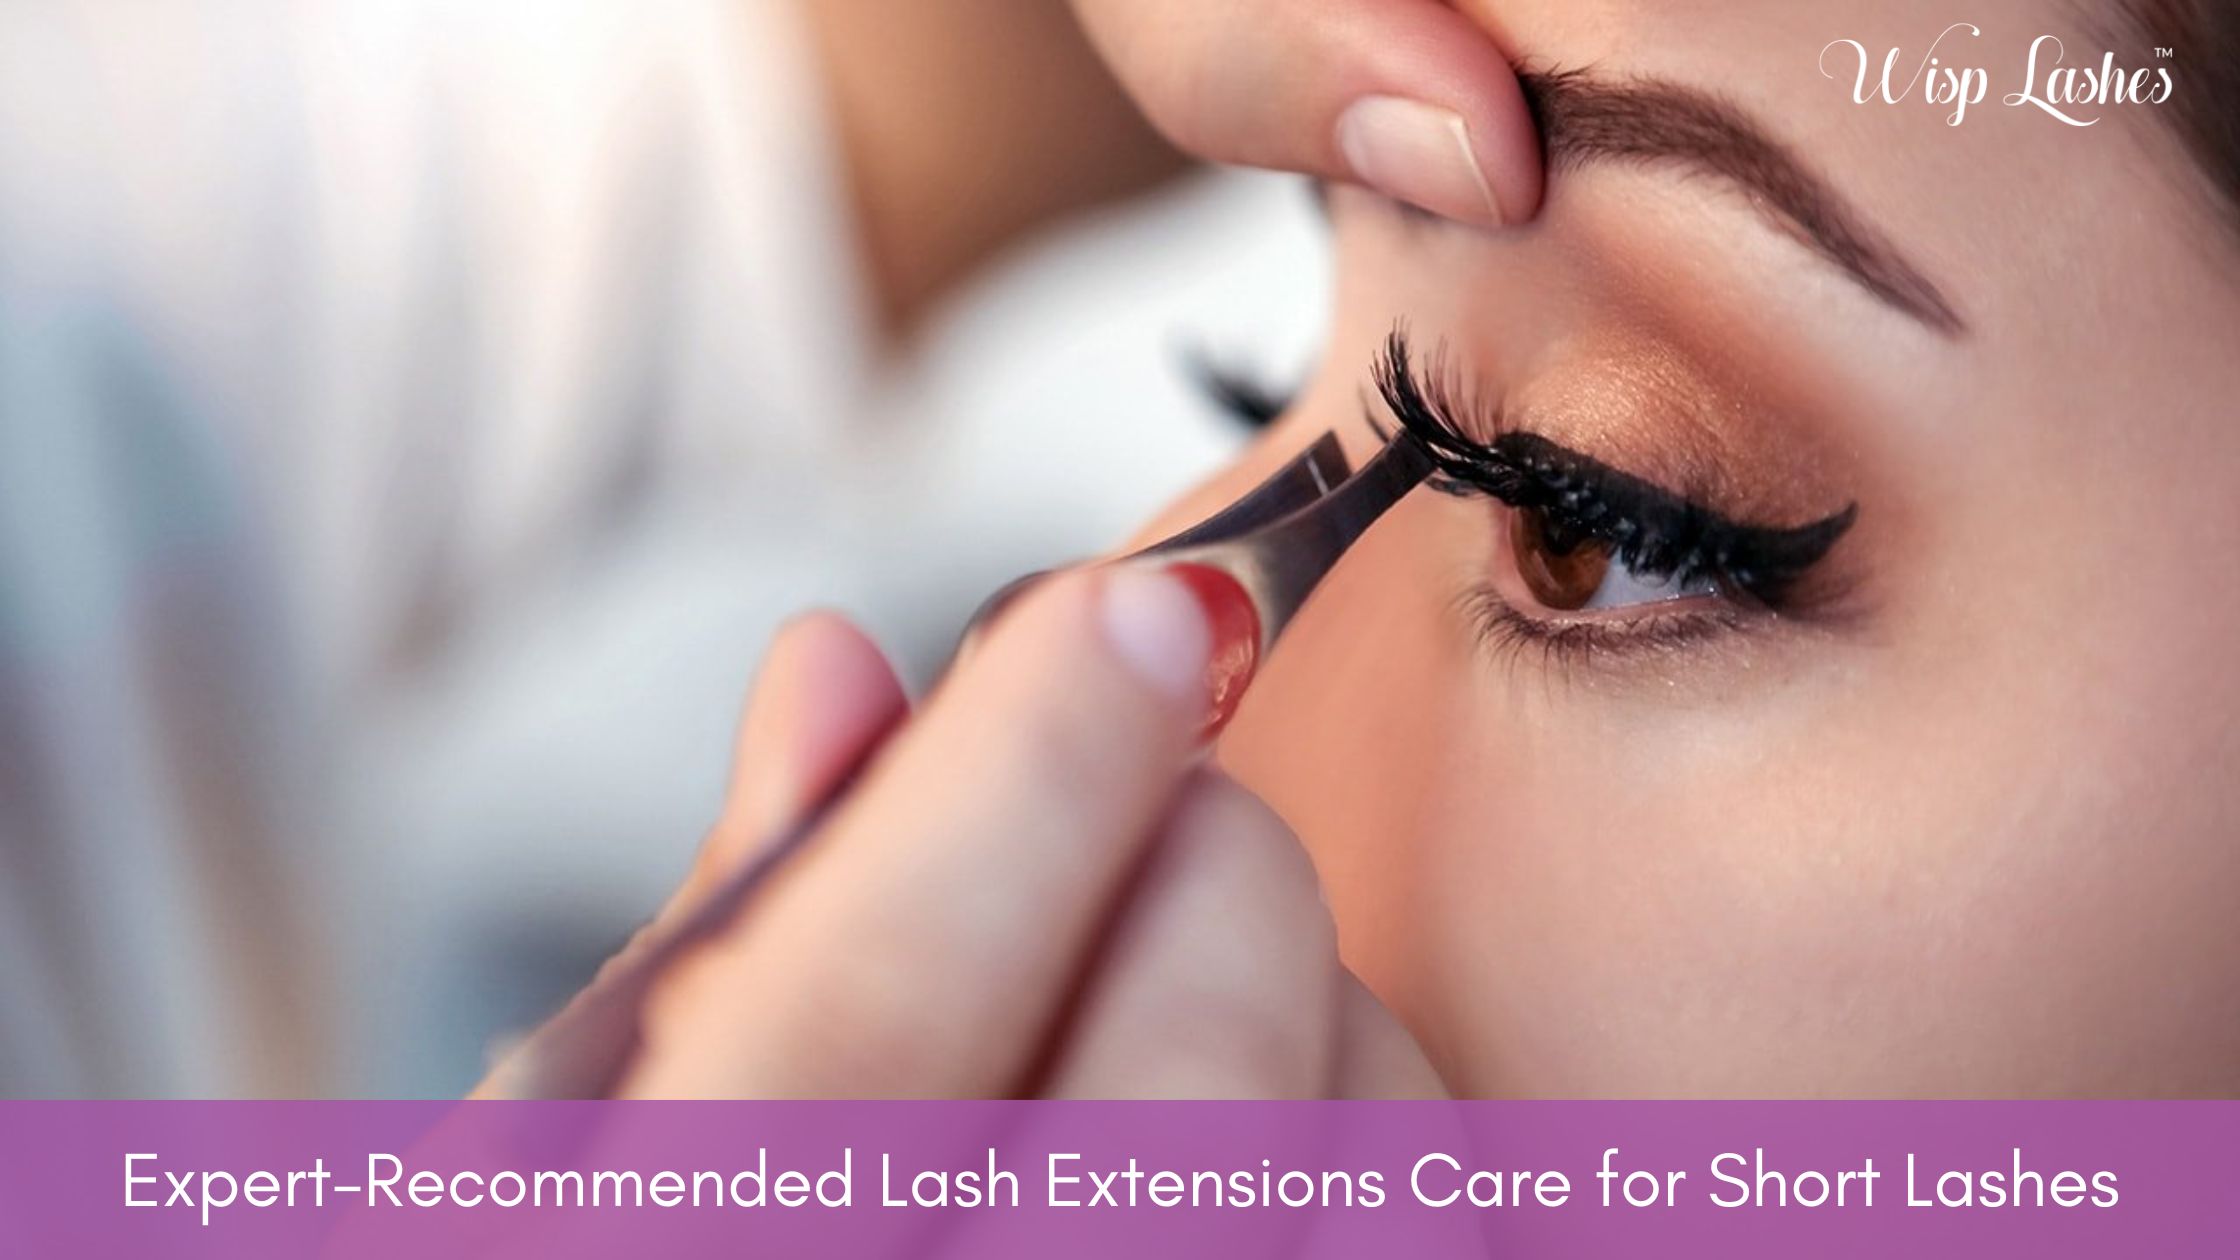 Expert-Recommended Lash Extensions Care for Short Lashes – Wisp Lashes